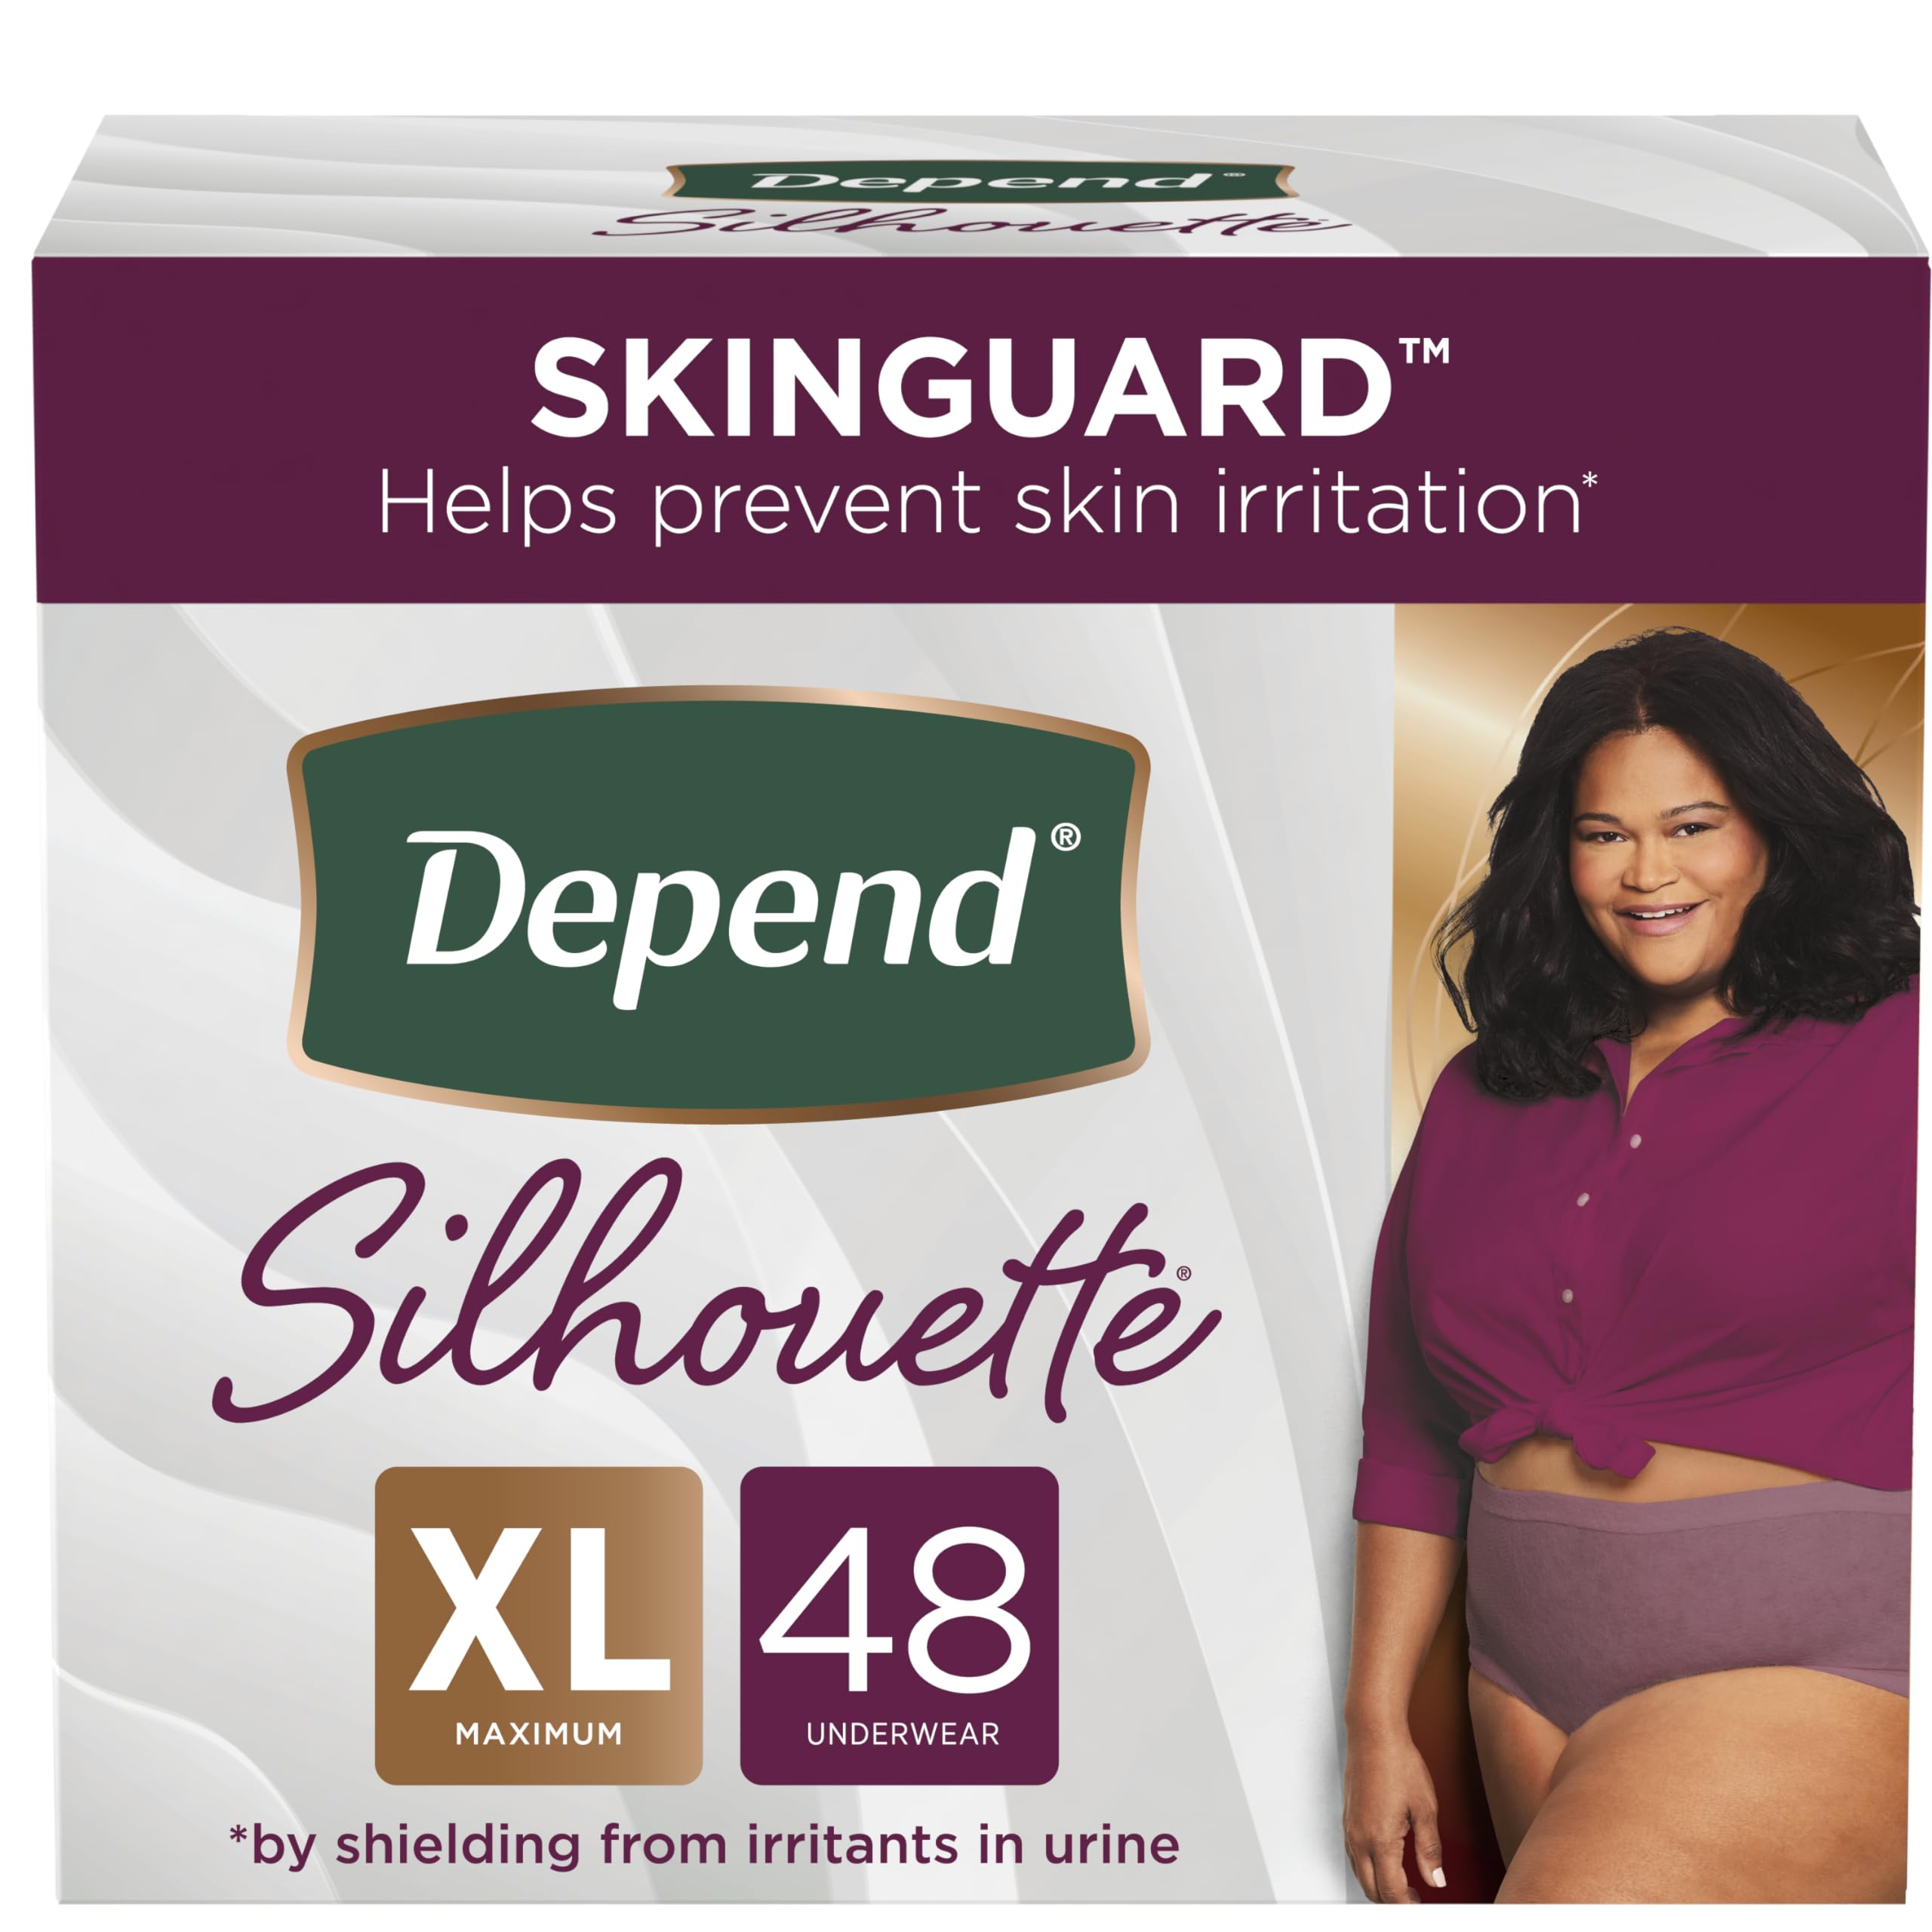 Depend Silhouette Women's Incontinence Underwear, Extra-Large, Maximum Absorbency - 48 Count (2 Packs of 24)